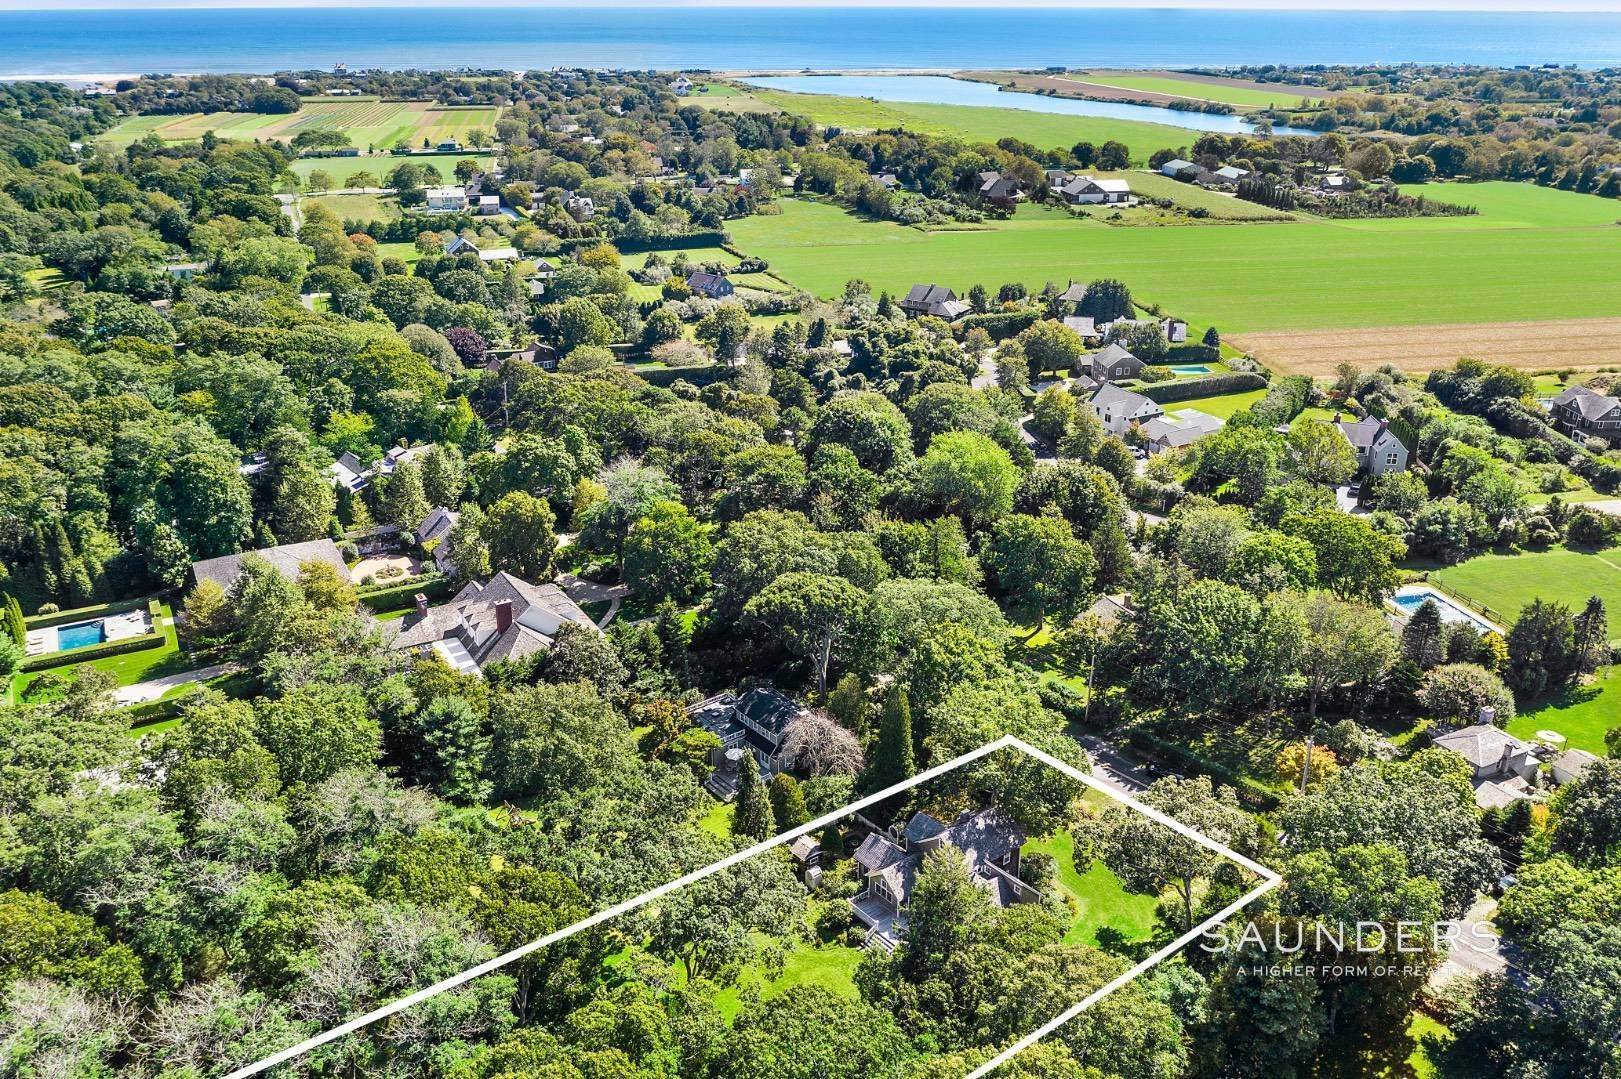 2. Single Family Homes for Sale at Rare 2-Acre South Land Opportunity 129 Sayres Path, Wainscott, NY 11937